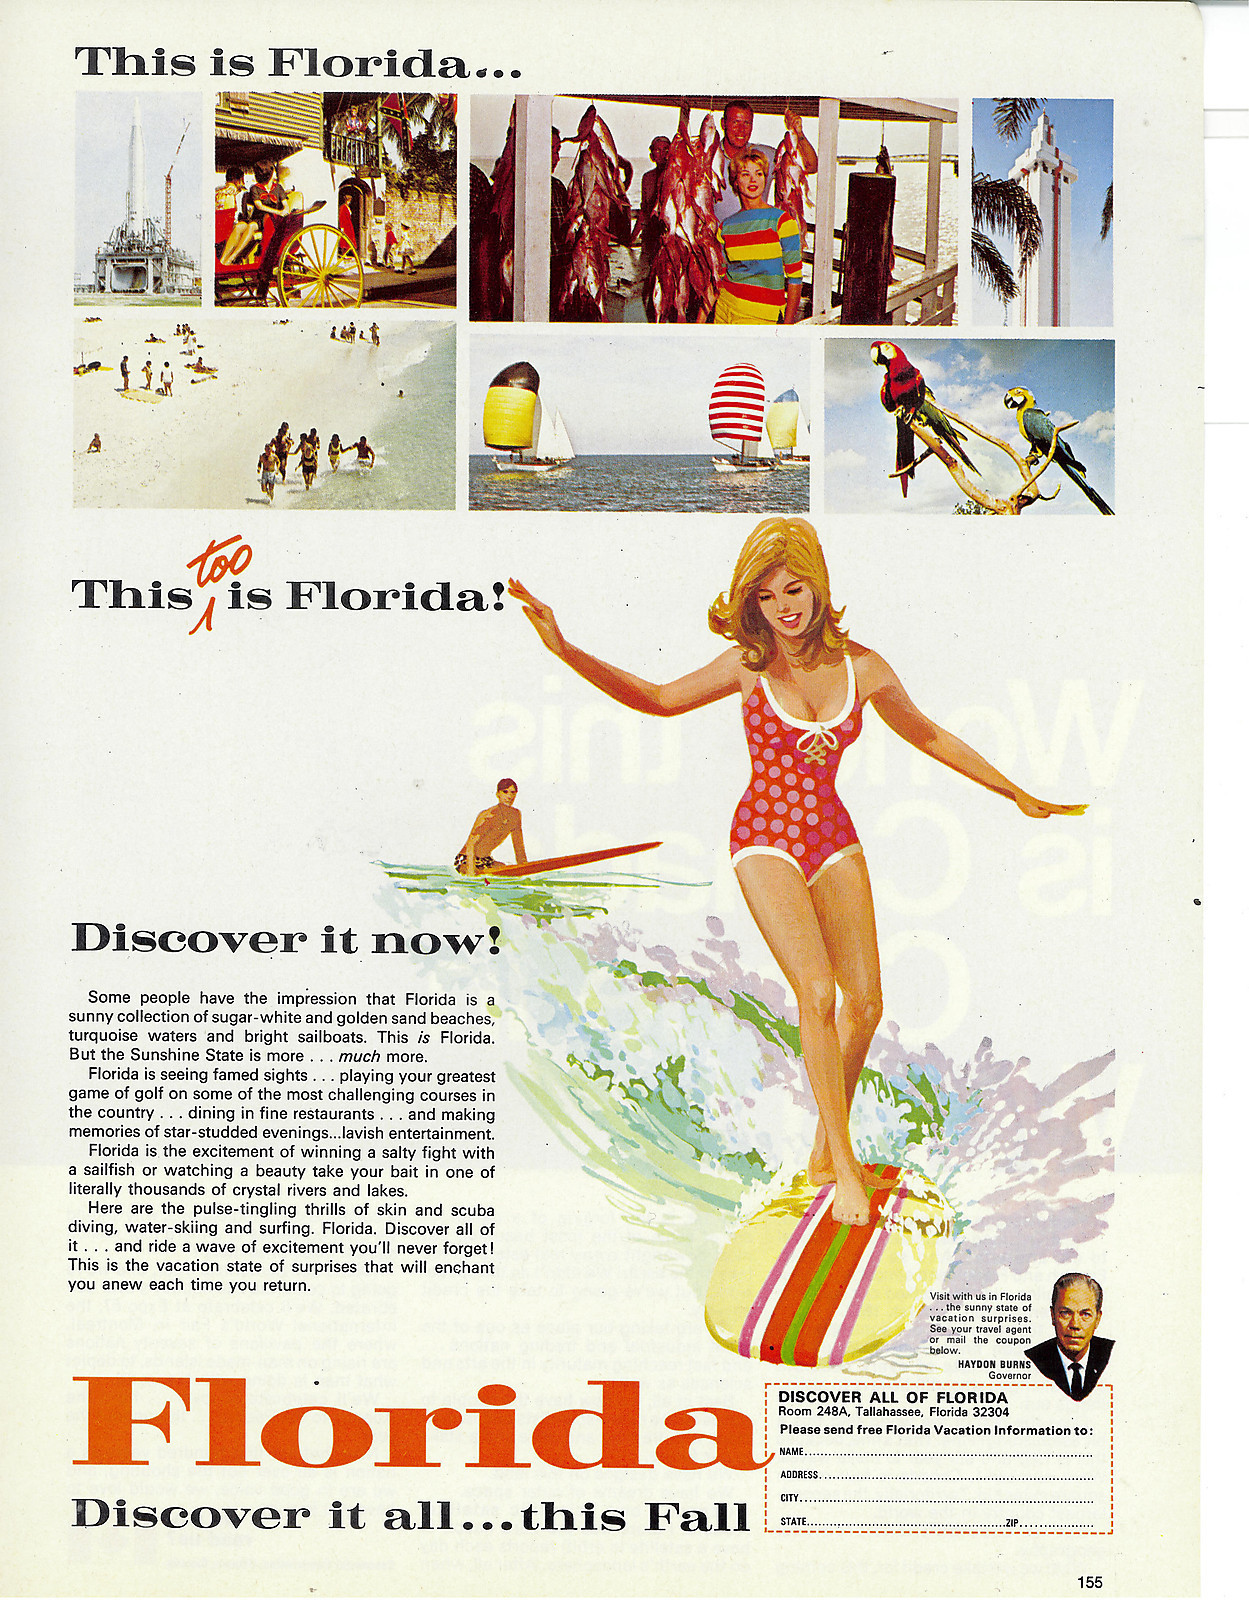 Miami Archives - Tracing the rich history of Miami, Miami Beach and the  Florida Keys: Vintage Florida State Tourism ad - 1966